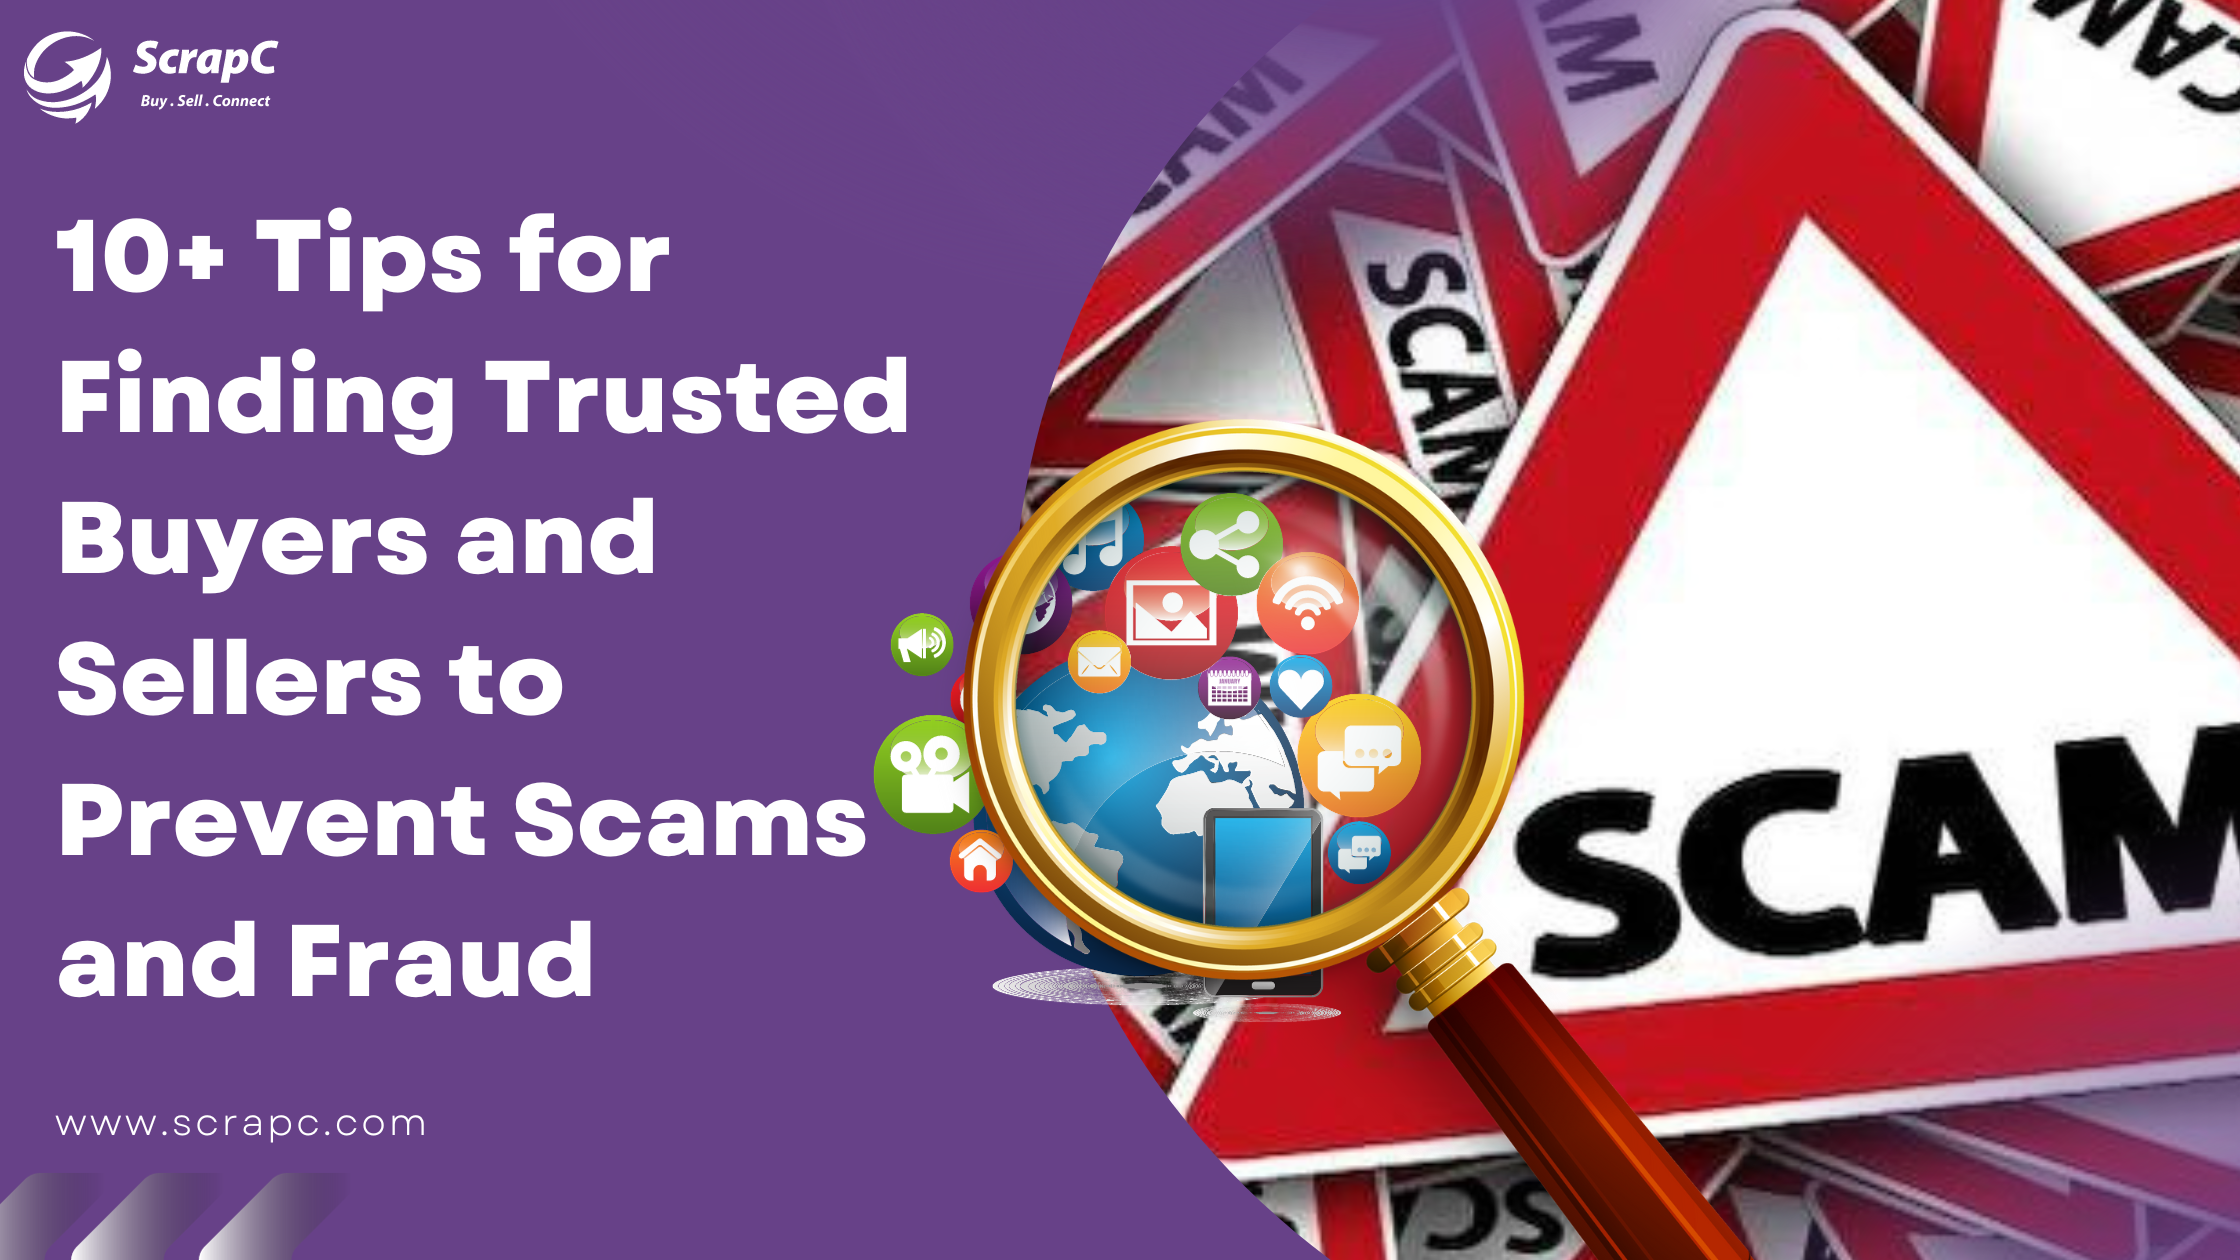 Tips for Finding Trusted Buyers and Sellers - Prevent Scams and Fraud